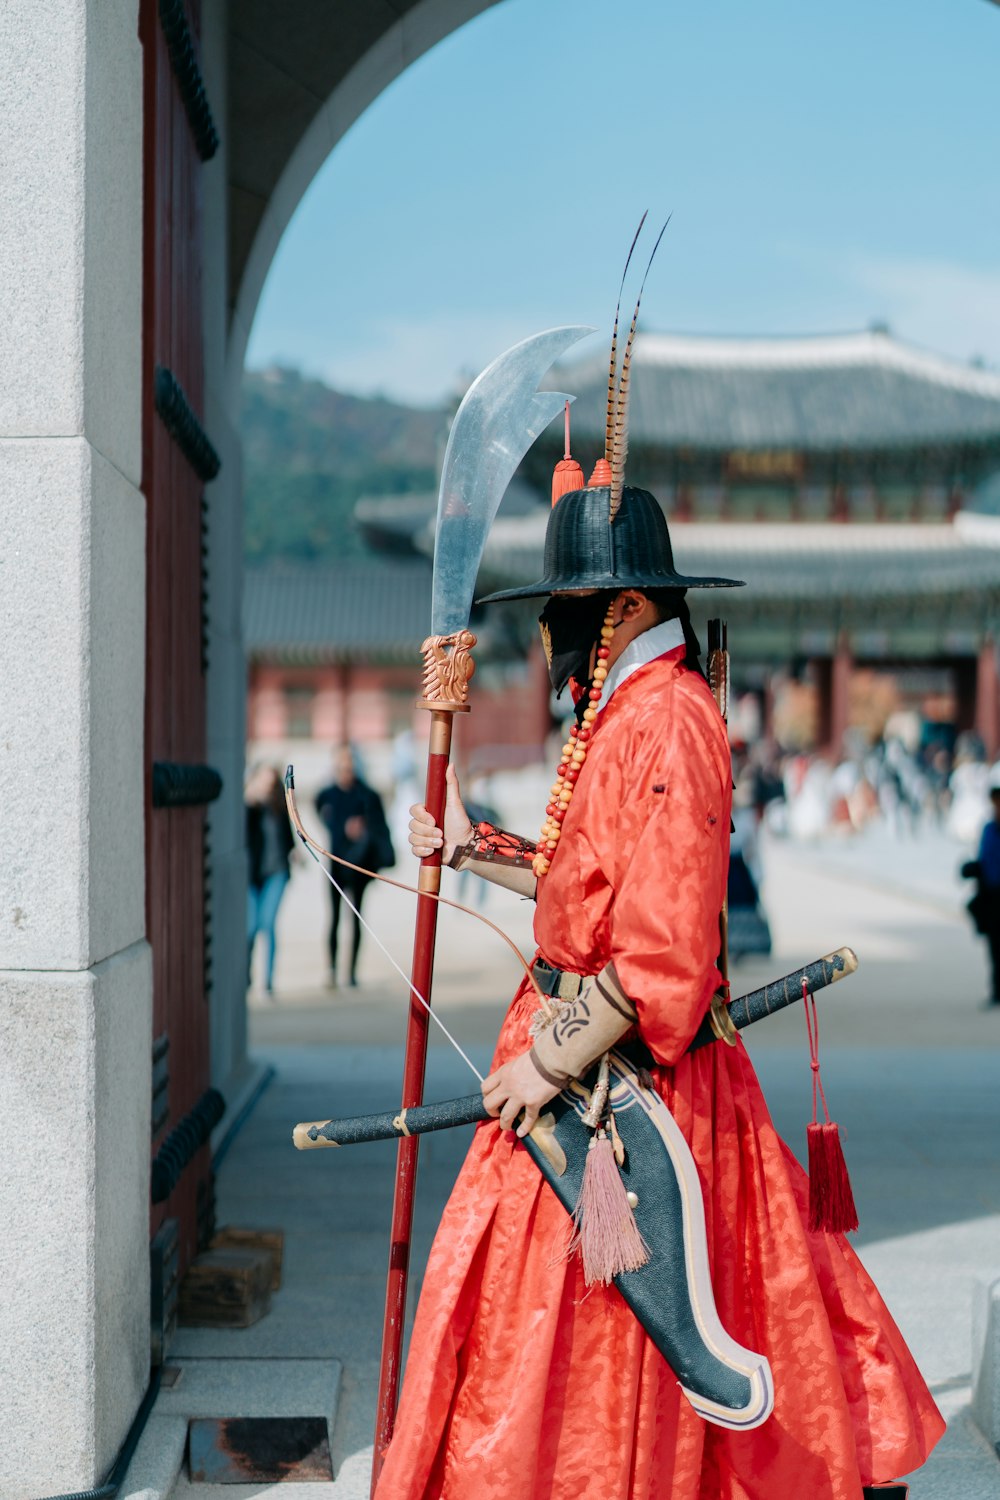 a man dressed in a costume holding a sword